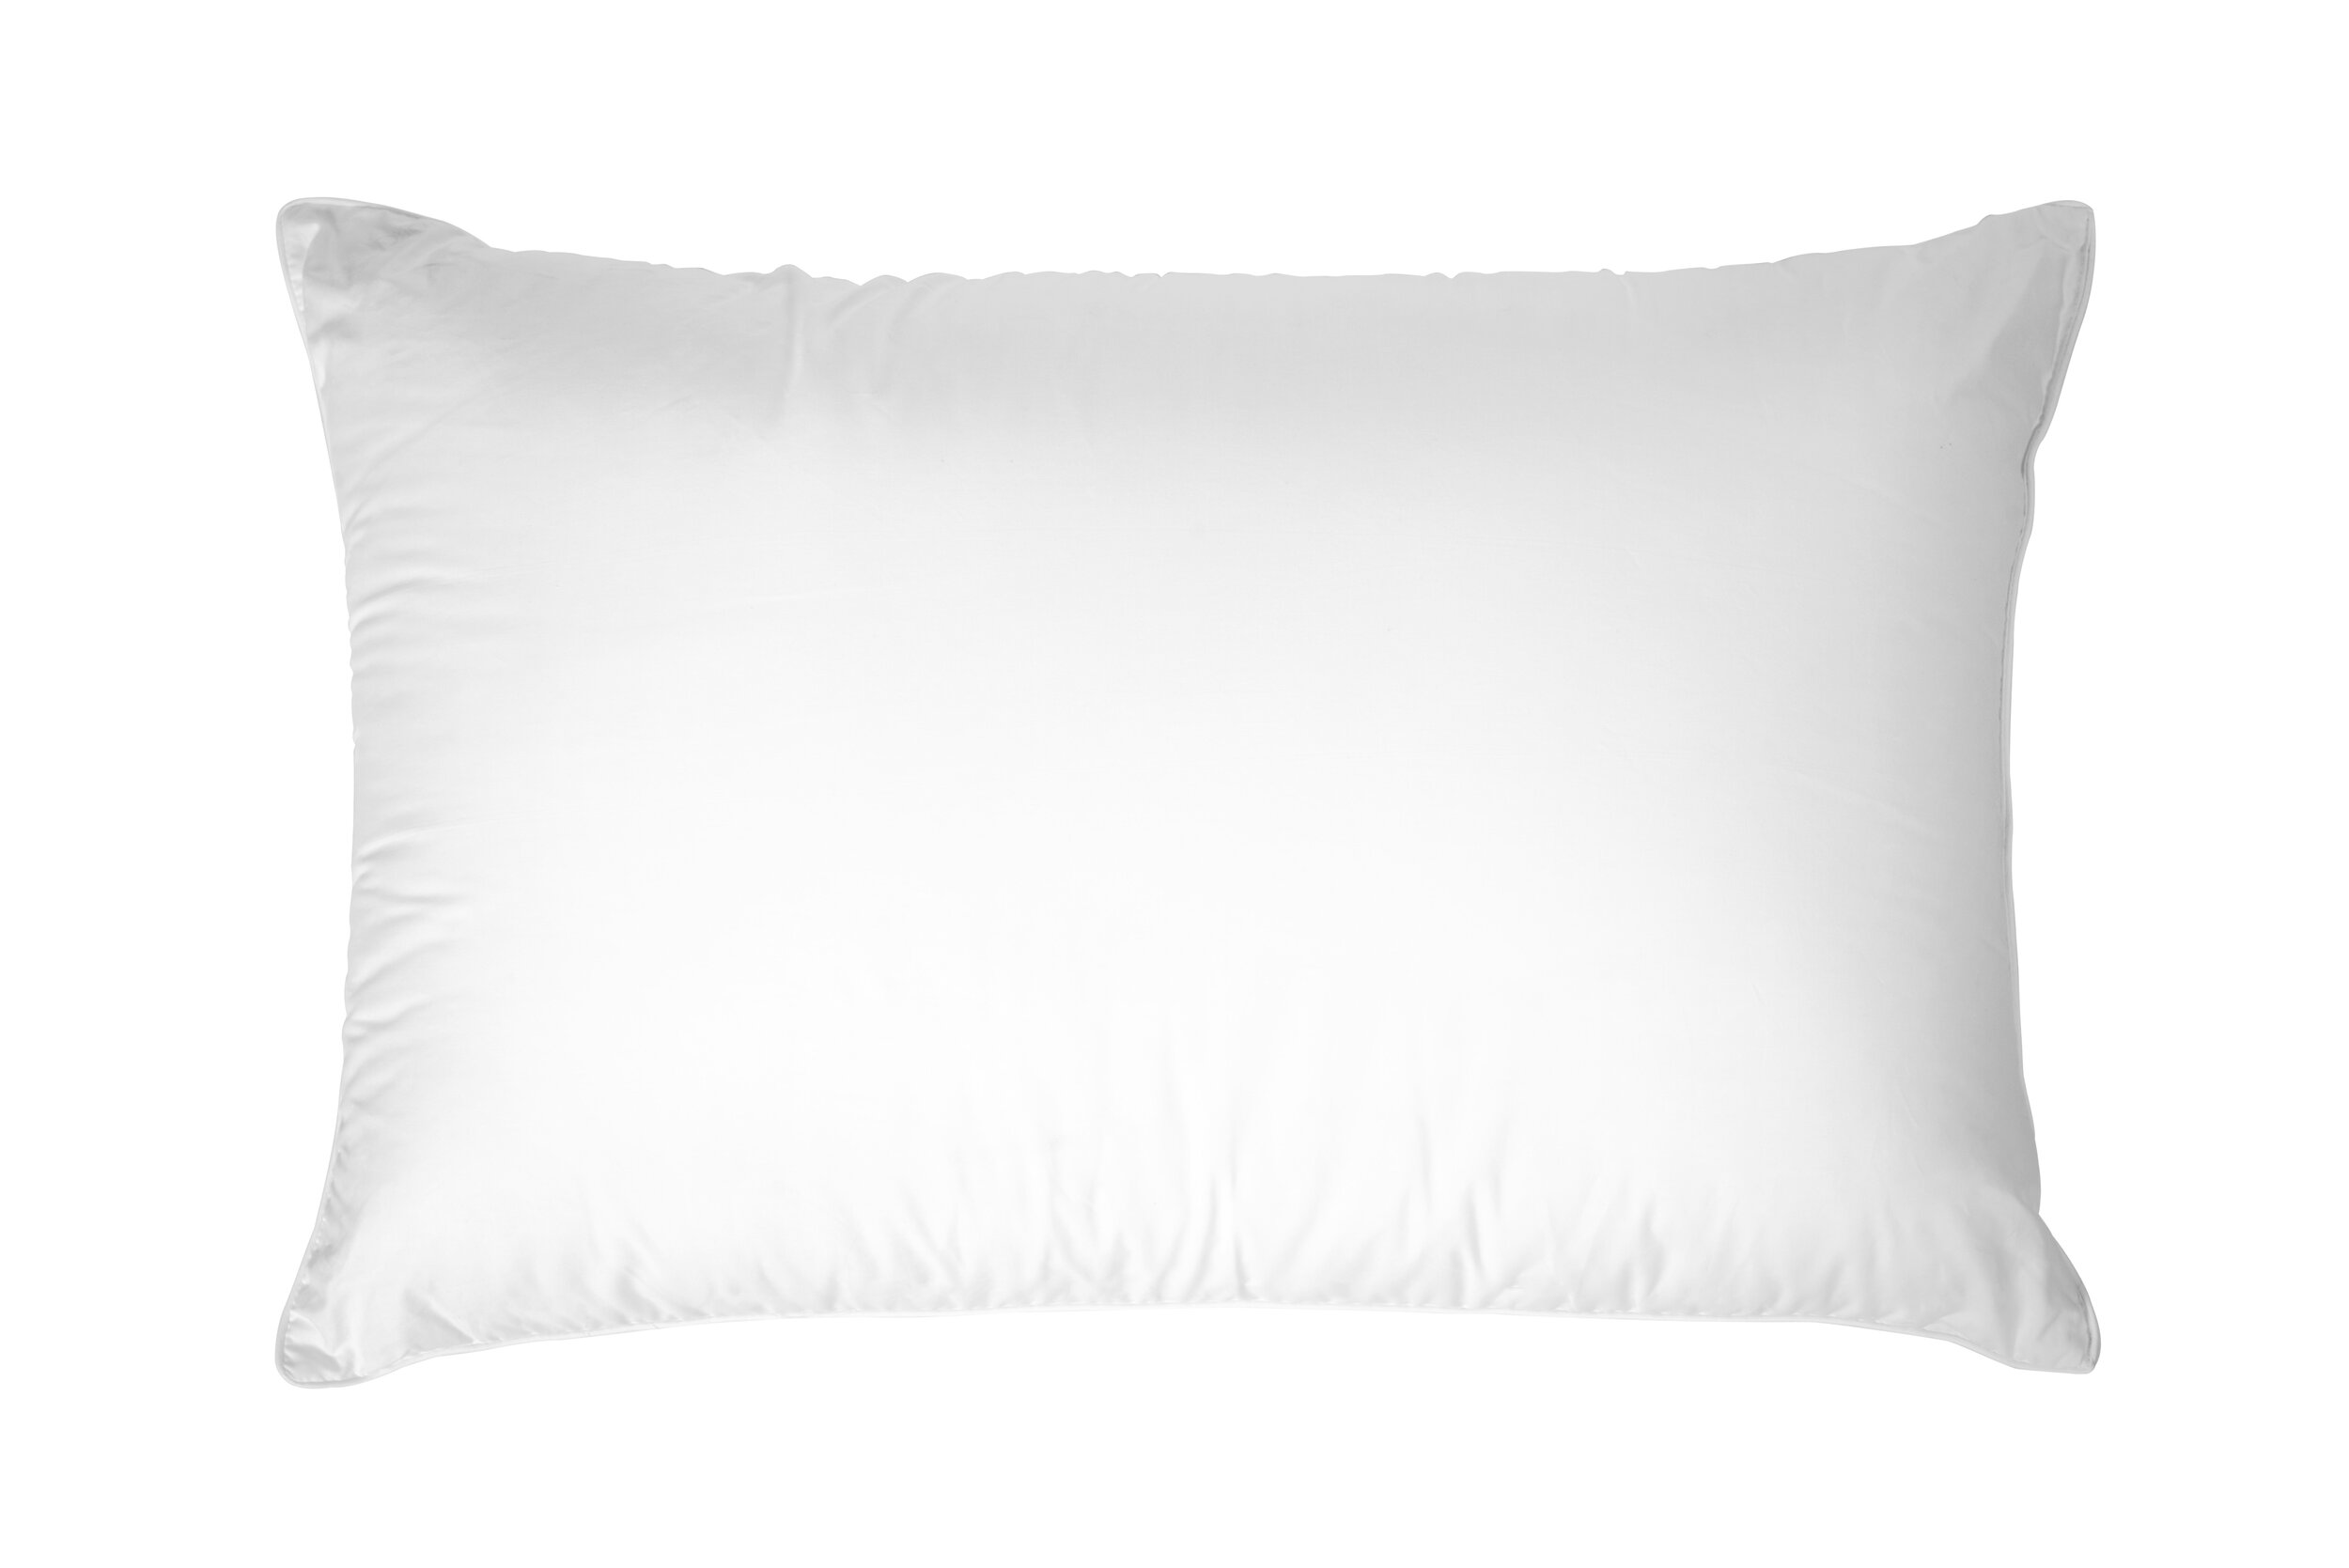 Extra Soft Layered Filled Hotel Quality Pillows Cotton Cambric Soft As Down 